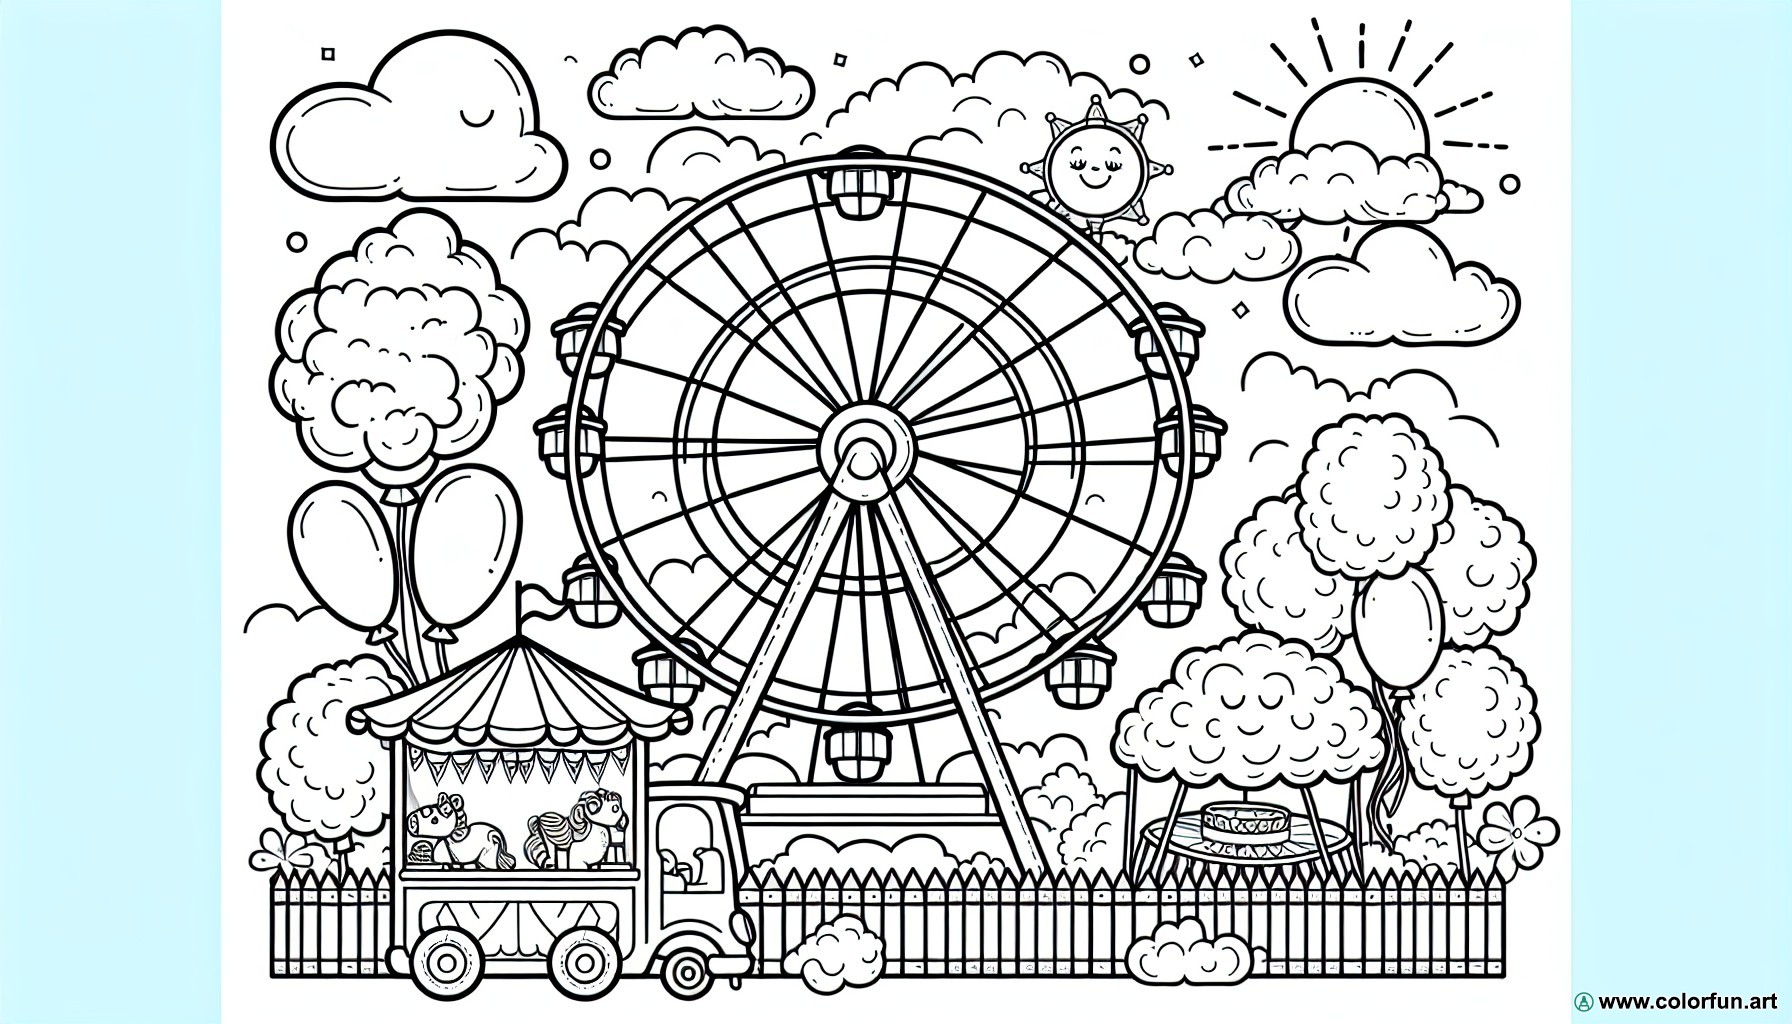 coloring page theme fairground